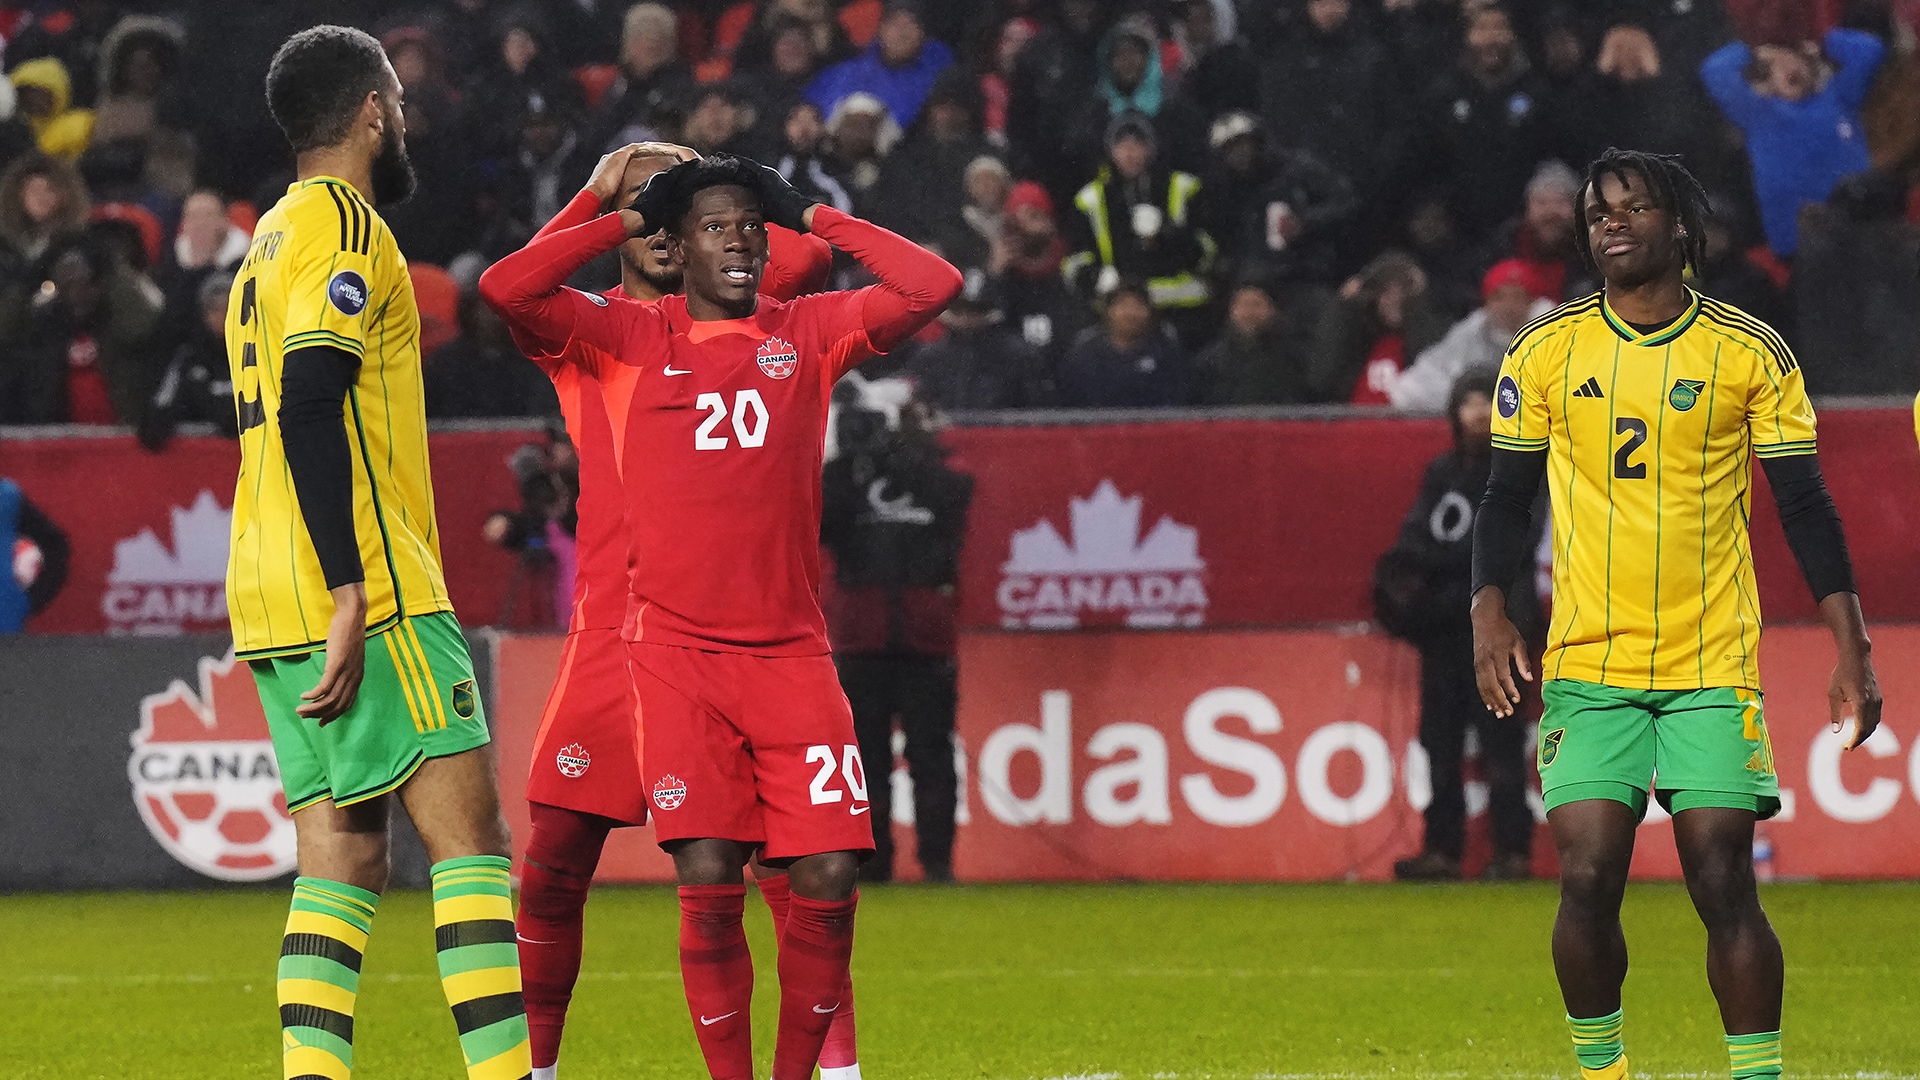 Canada lost its Copa America qualifier. Now what?